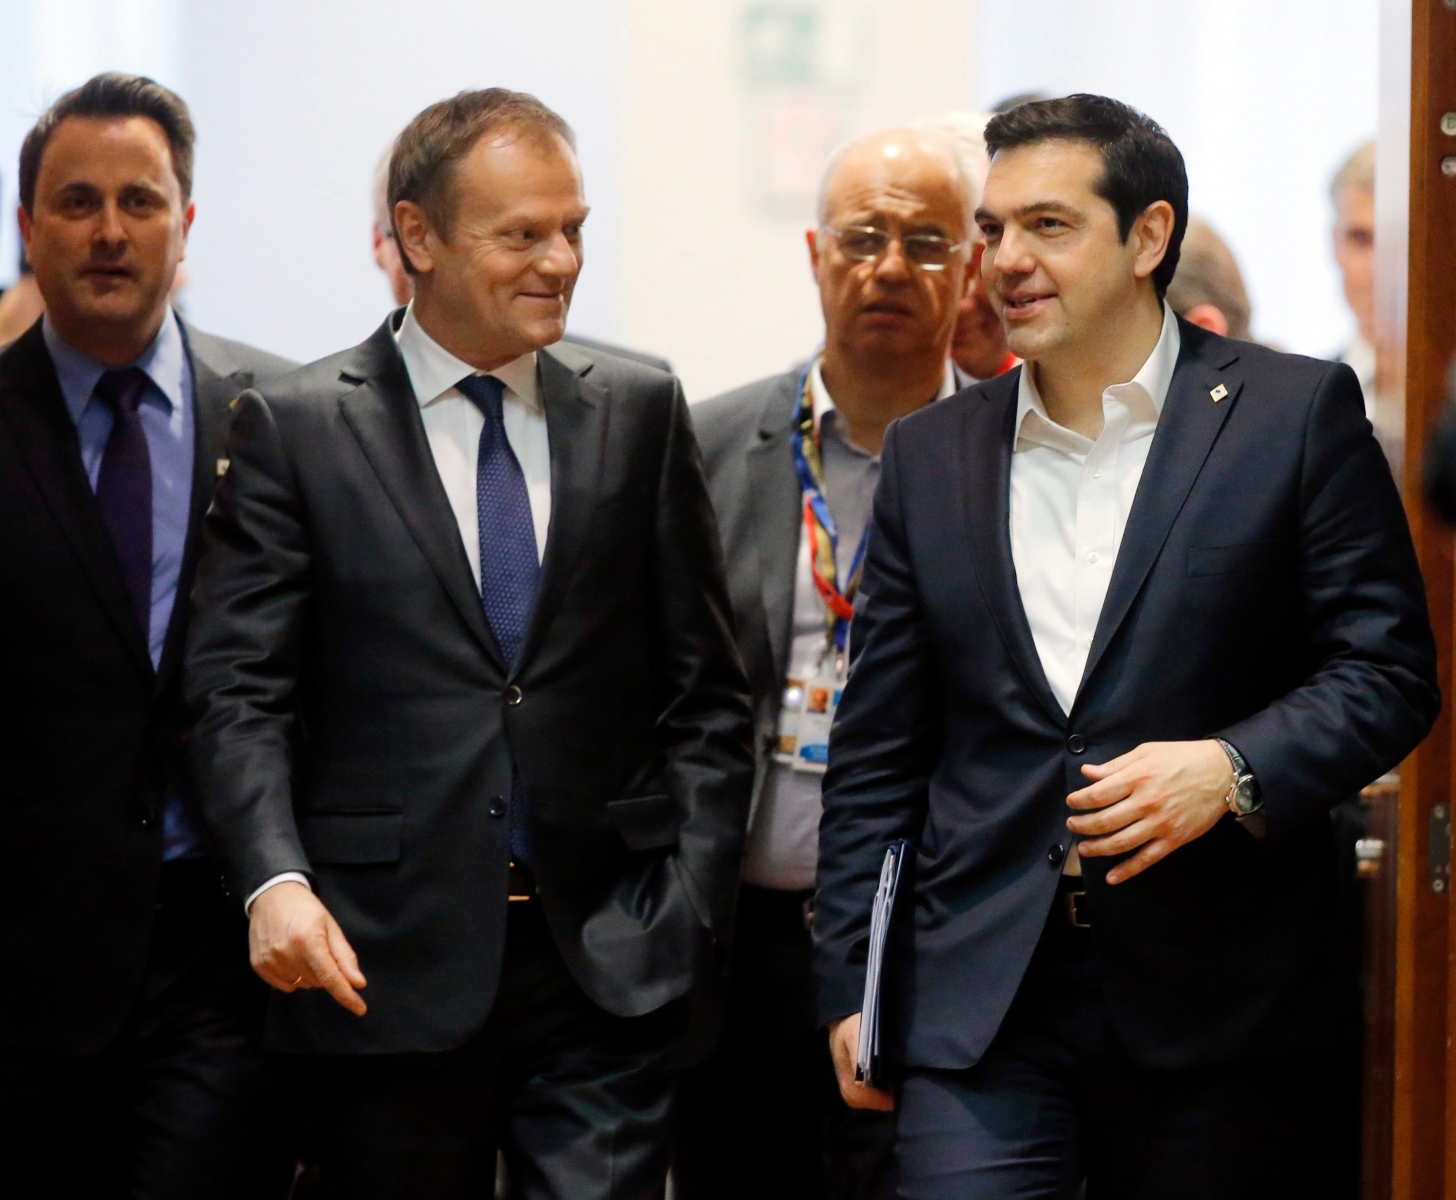 epa05216563 EU Council President Donald Tusk (L) and Greek Prime Minister Alexis Tsipras (R) arrive on the first day of a two-days European Union leaders summit in Brussels, Belgium, 17 March 2016. Others are not identified. EU leaders on 17 and 18 March are to discuss a deal with Turkey that is aimed to tackle the migration crisis and curb migration into the bloc.  EPA/OLIVIER HOSLET BELGIUM EU SUMMIT